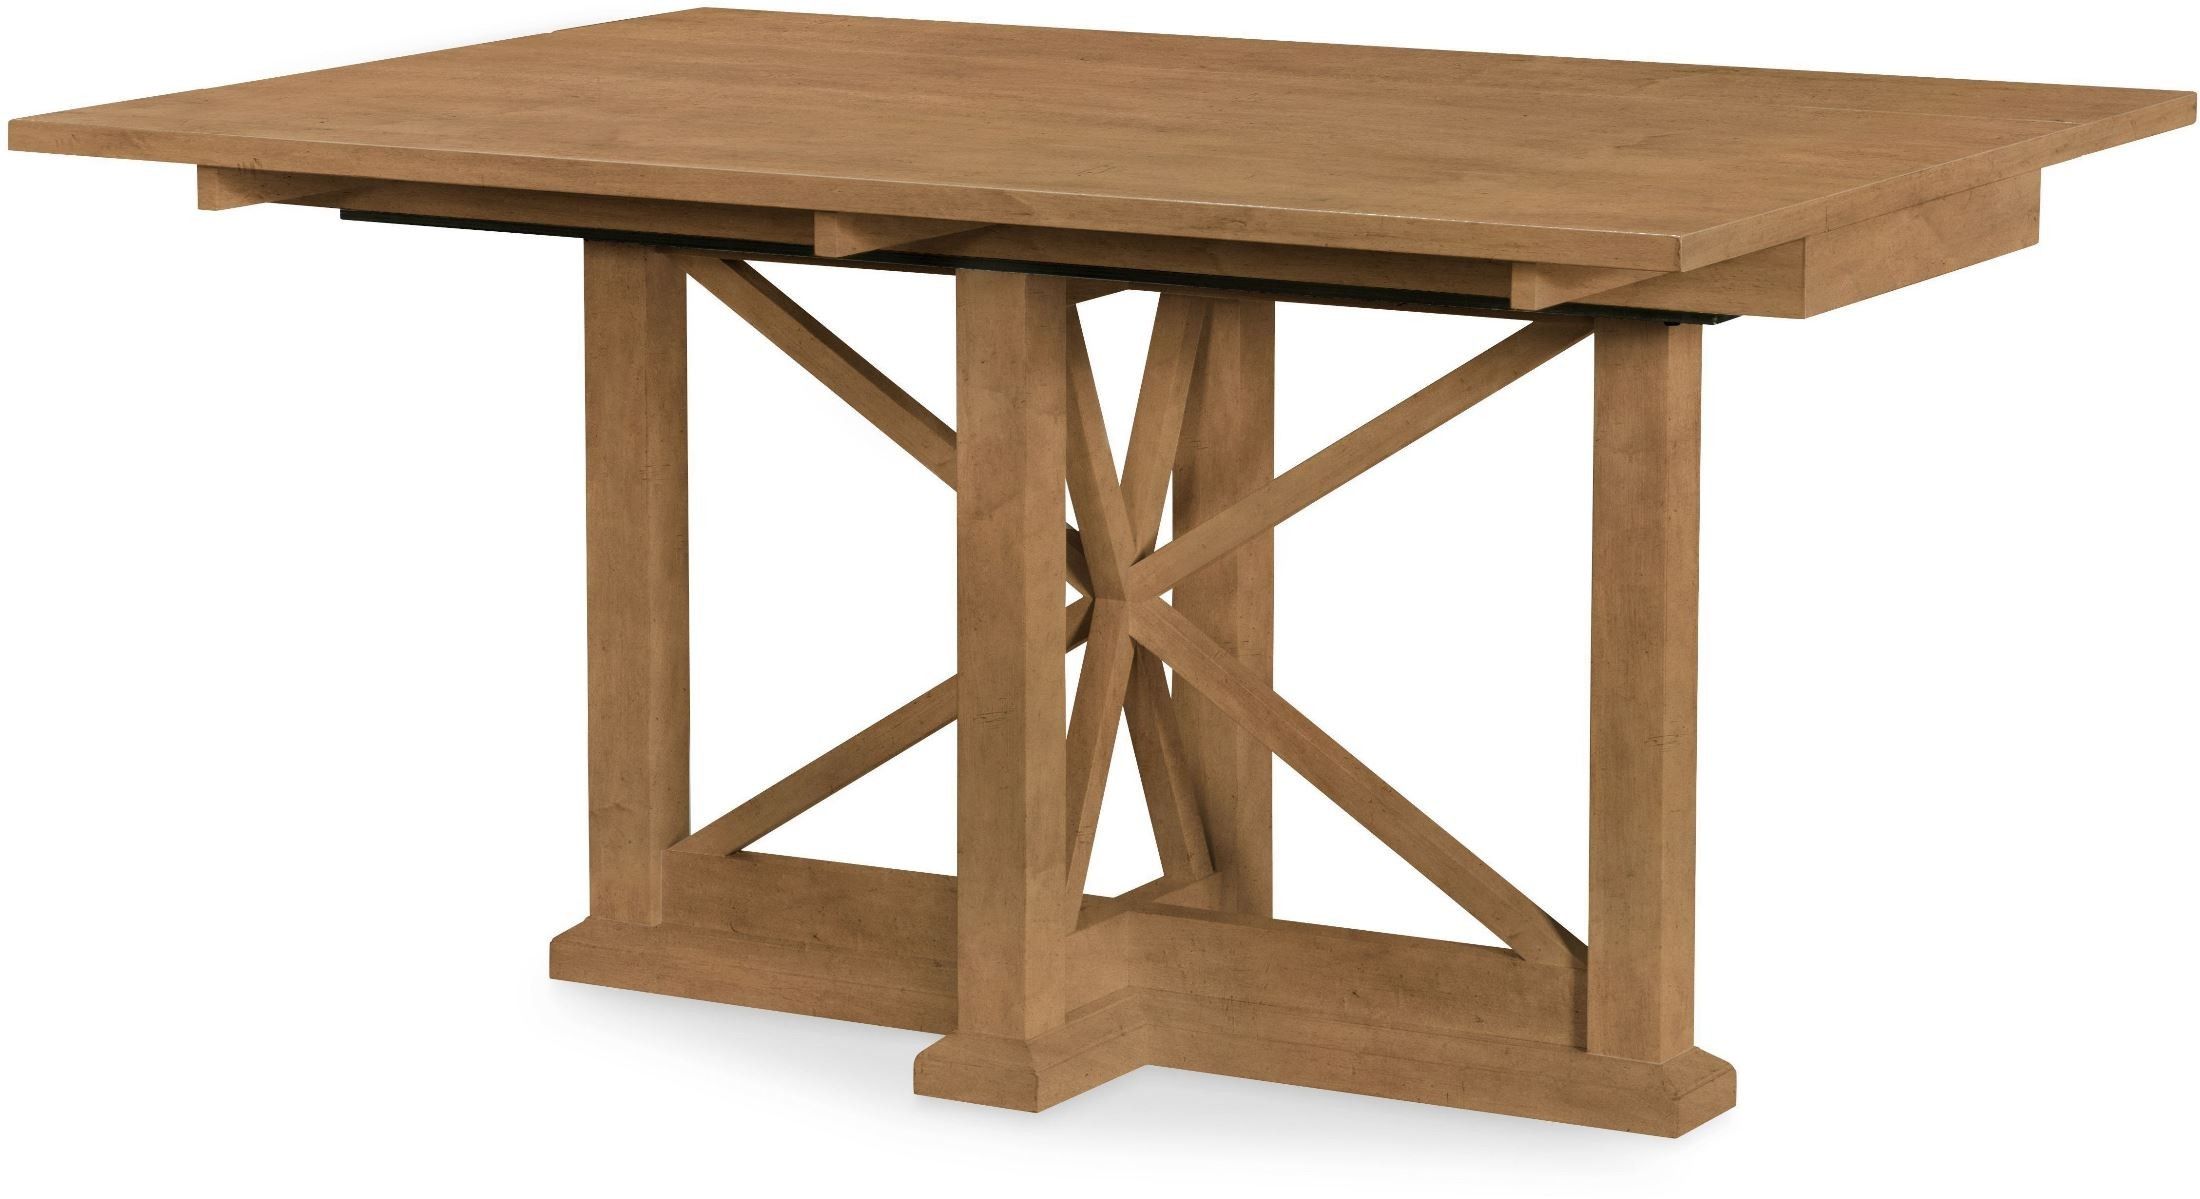 Everyday Sea Salt Drop Leaf Console Extendable Dining Table From Intended For Gray Drop Leaf Console Dining Tables (View 2 of 15)